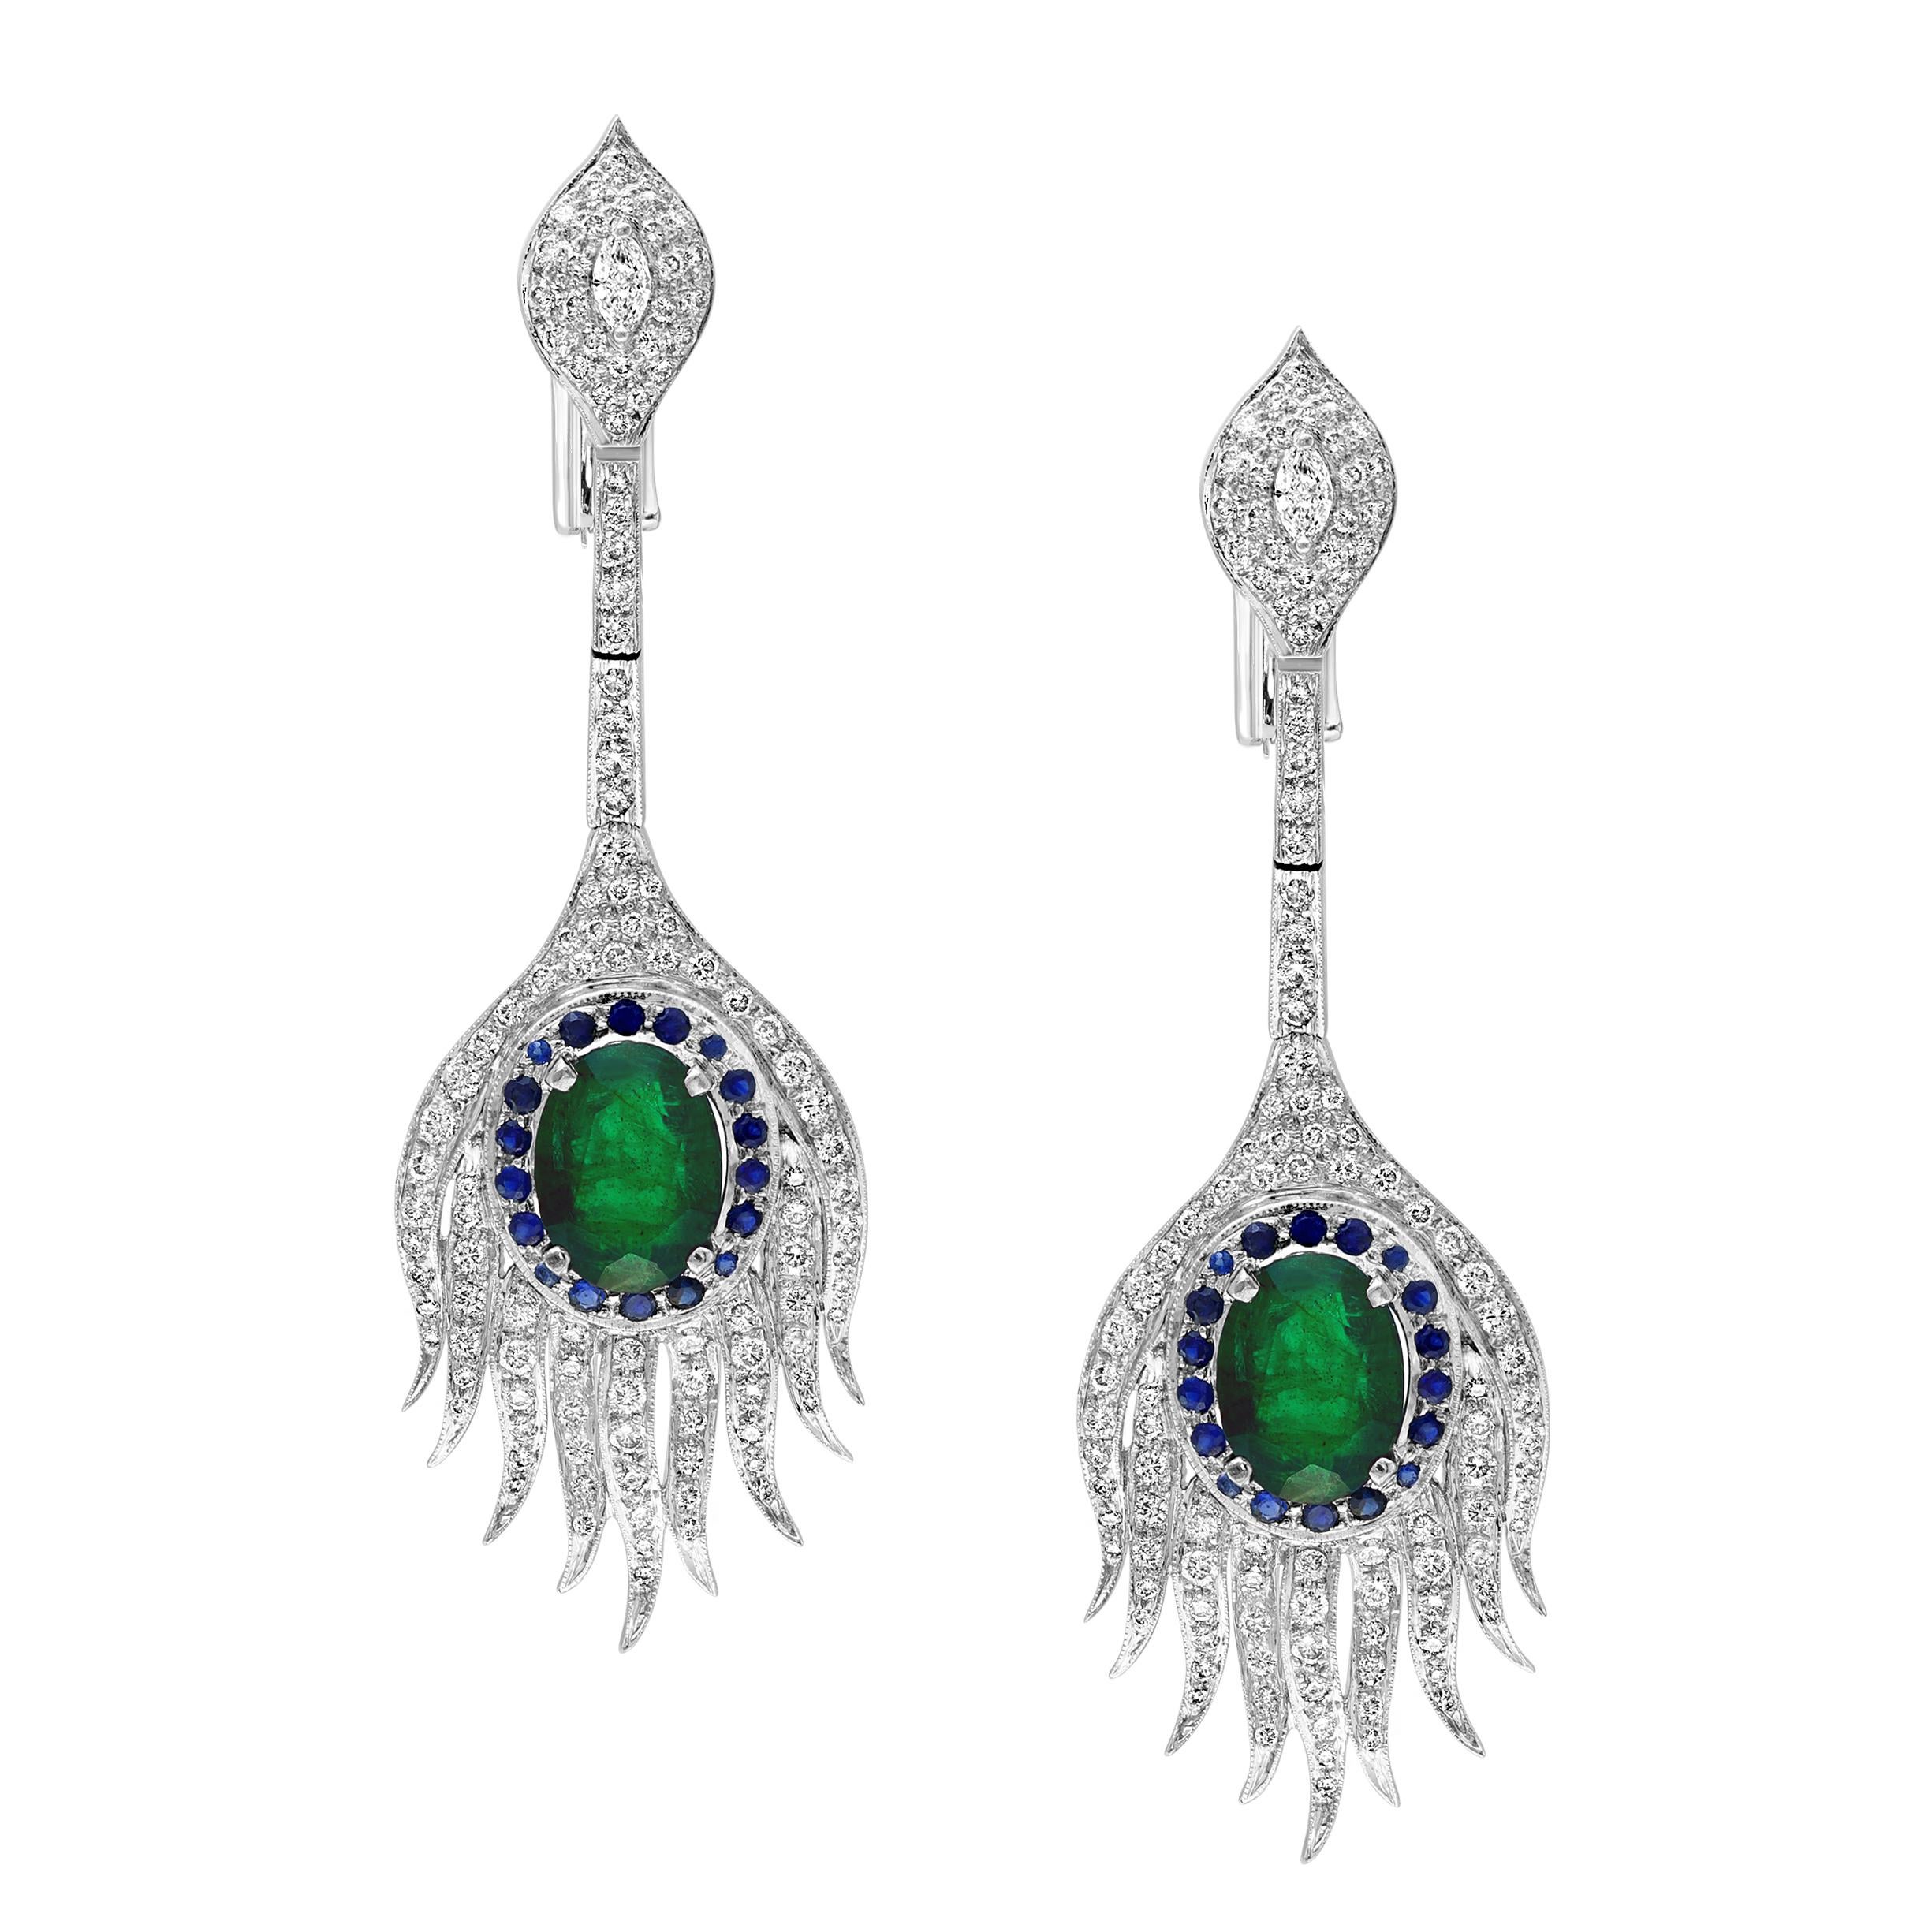 GIA Certified 20ct Zambian Emerald & 15ct Diamond Necklace Earring Suite 18KWG Excellent état - En vente à New York, NY